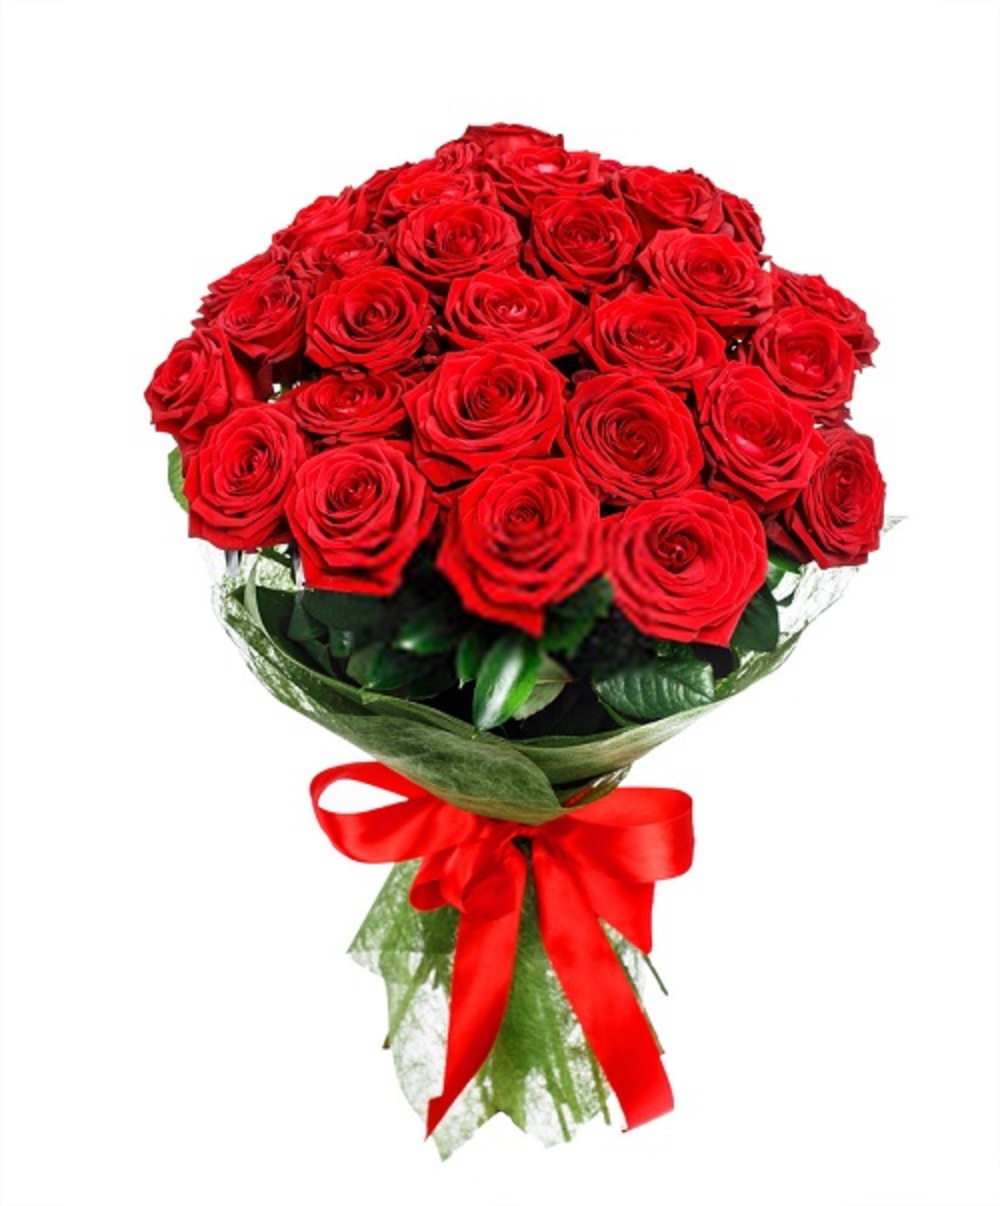  24 Red Roses Hand Bouquet